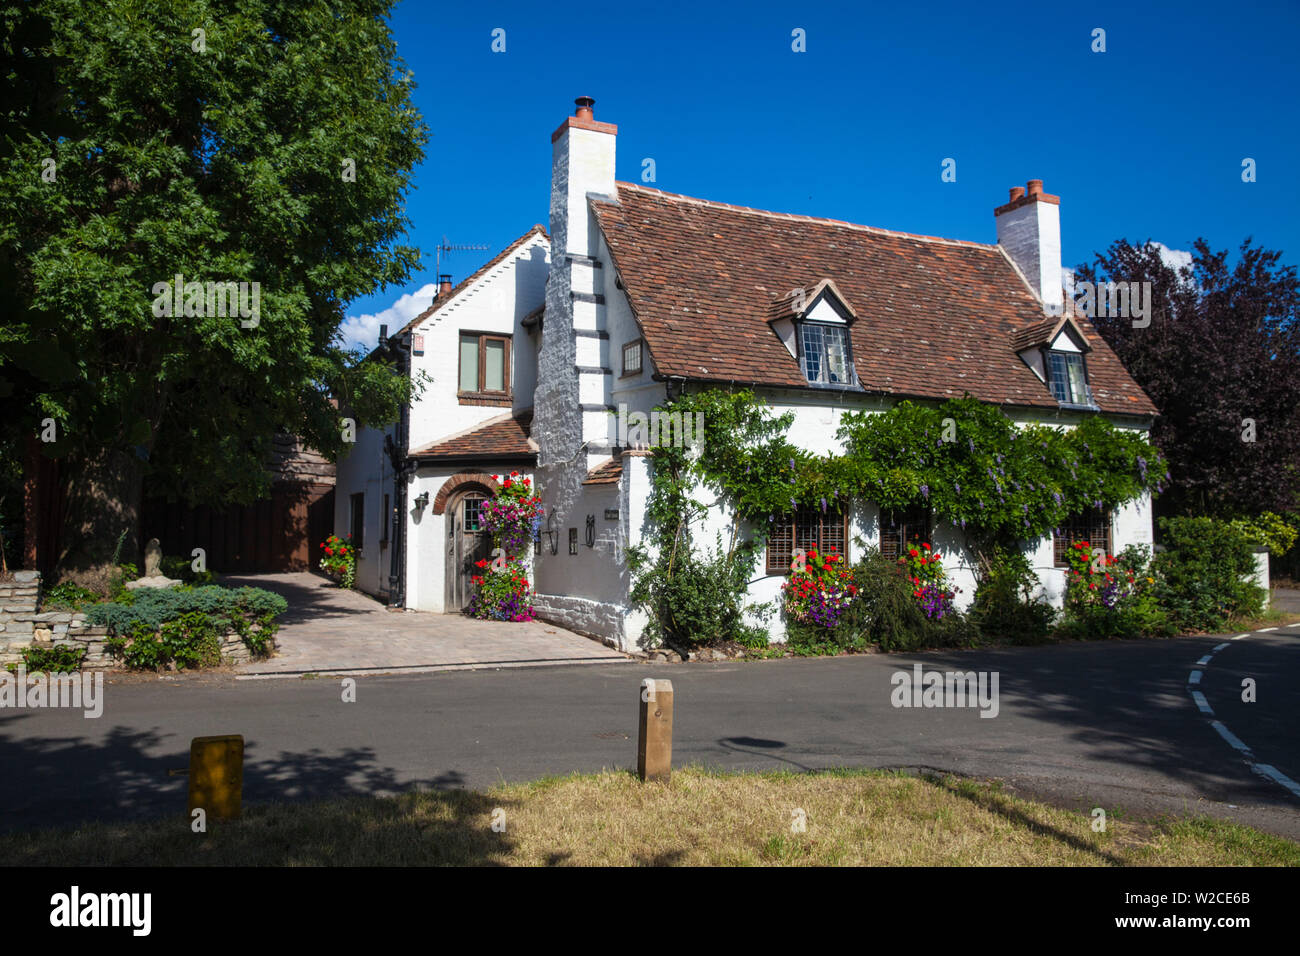 UK, England, Warwickshire, Stratford-upon-Avon, A picturesque house in Shottery Village Stock Photo